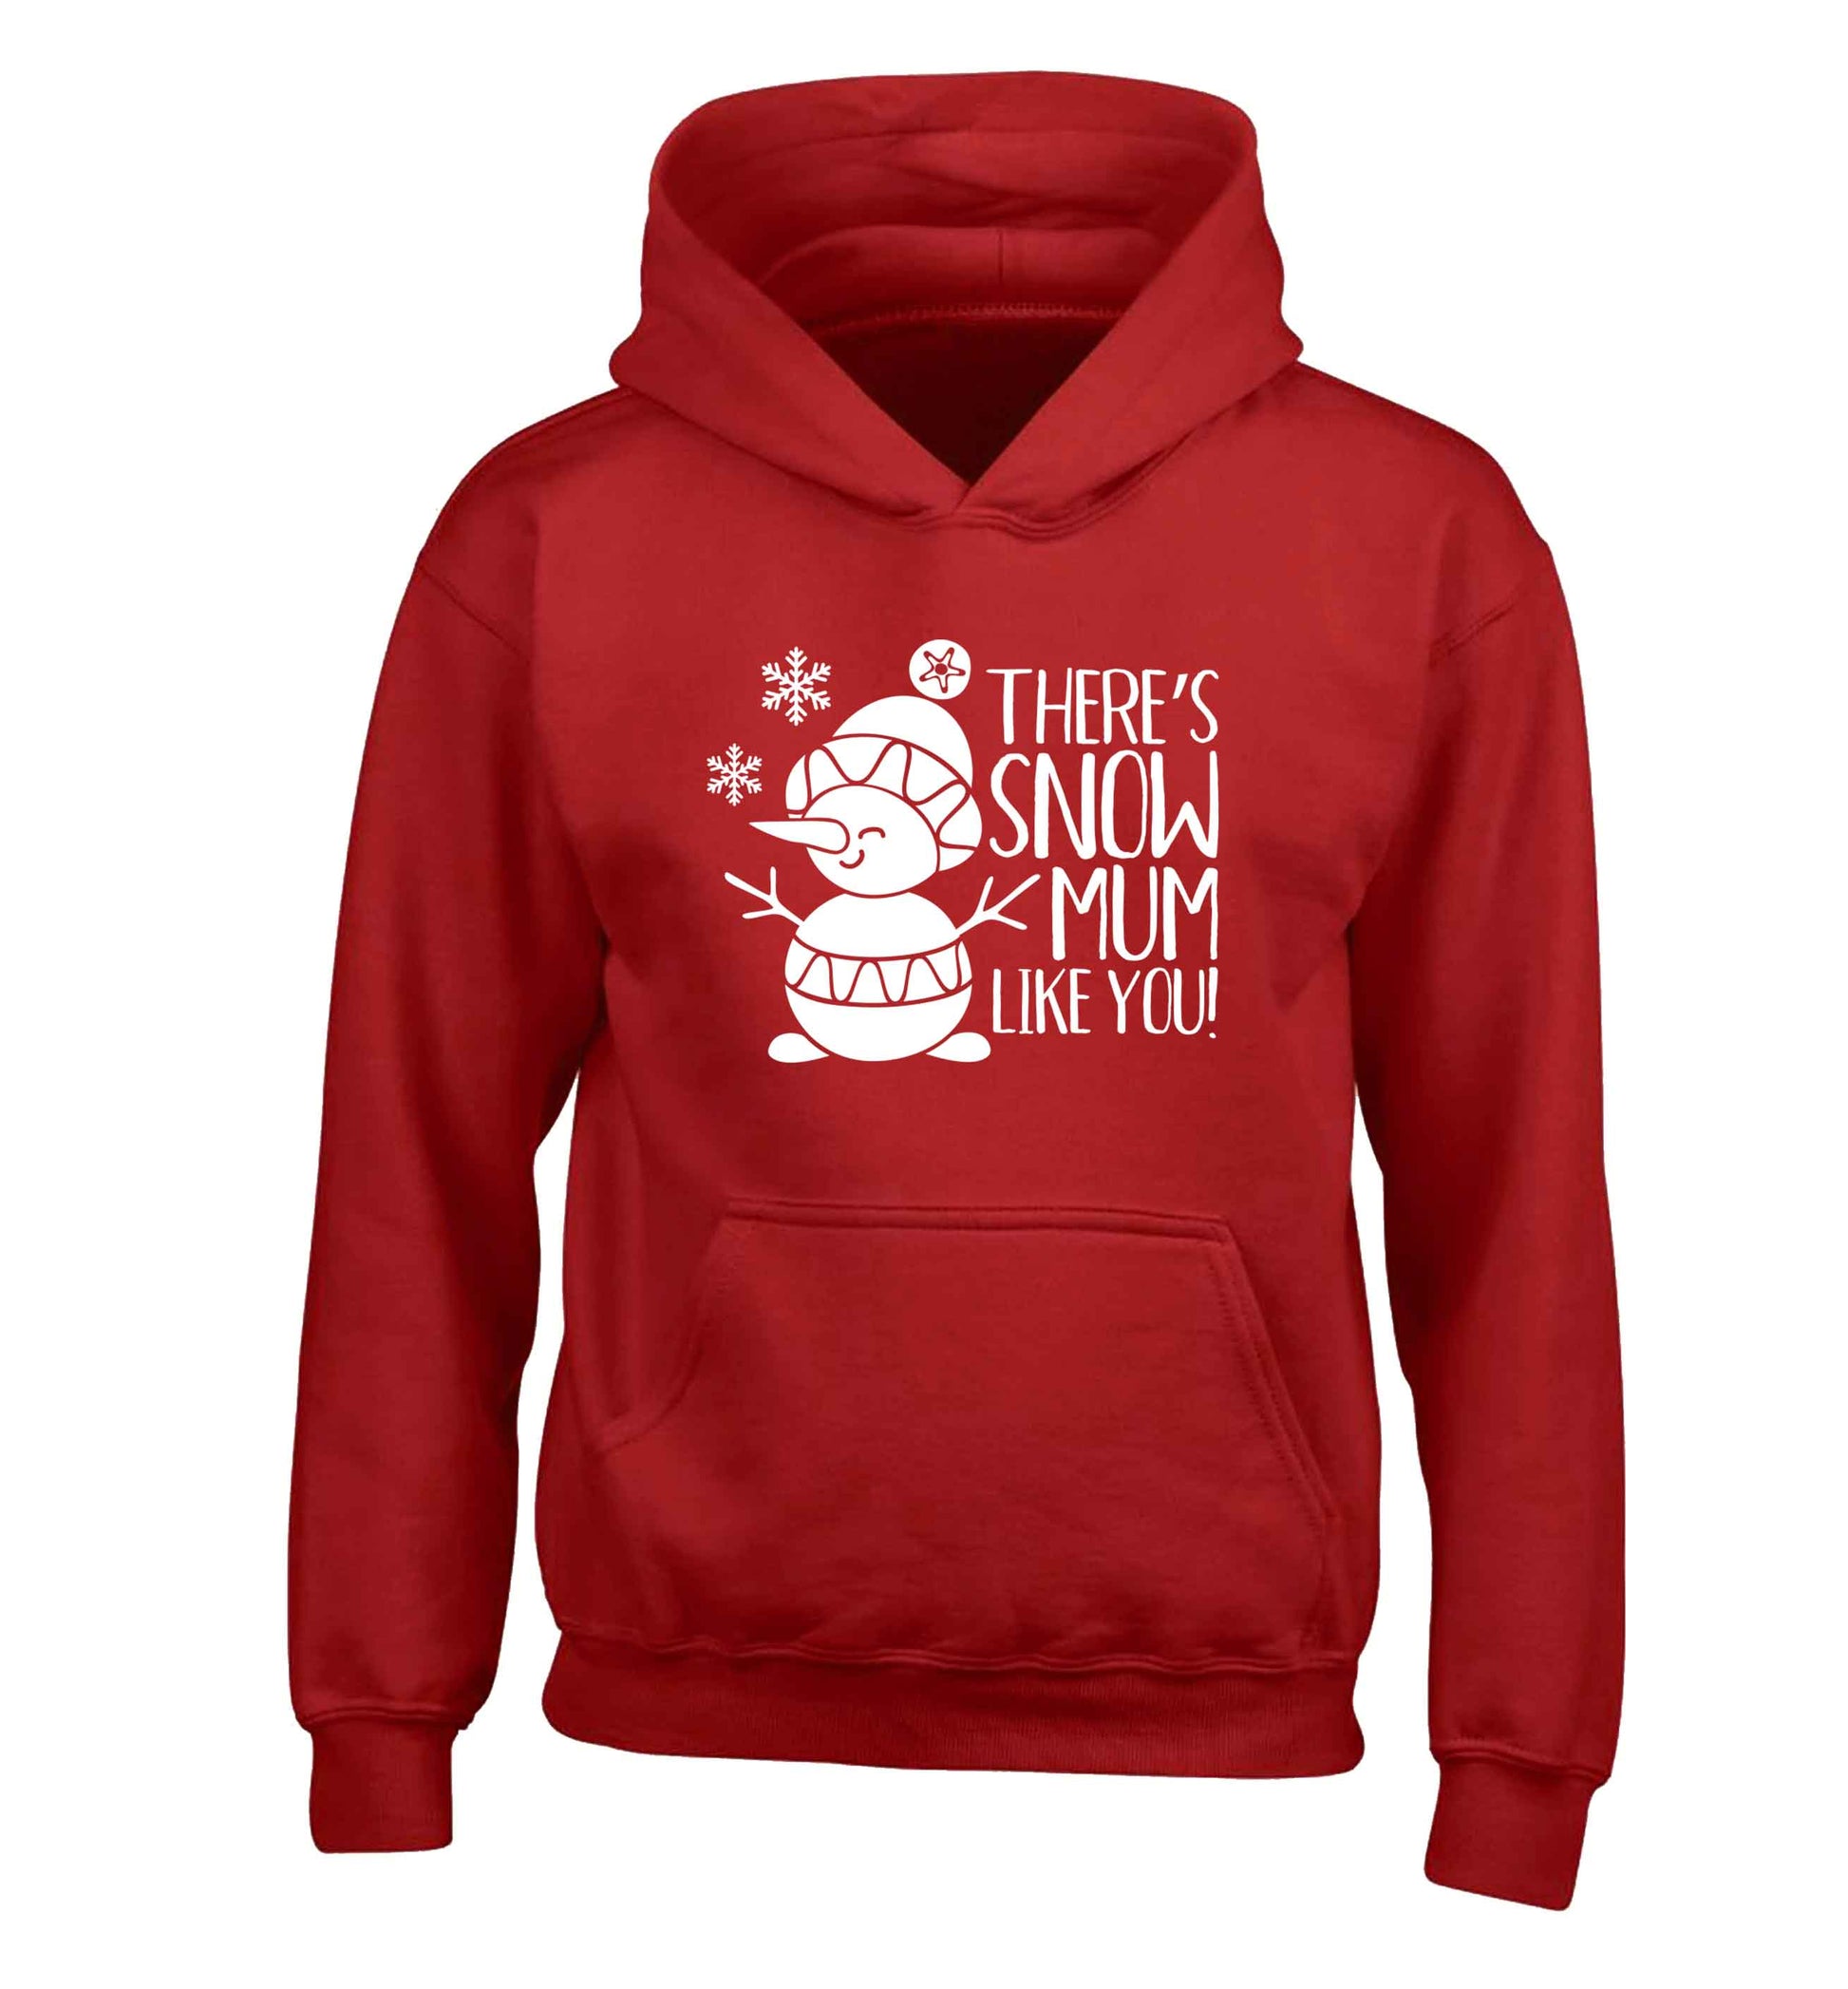 There's snow mum like you children's red hoodie 12-13 Years